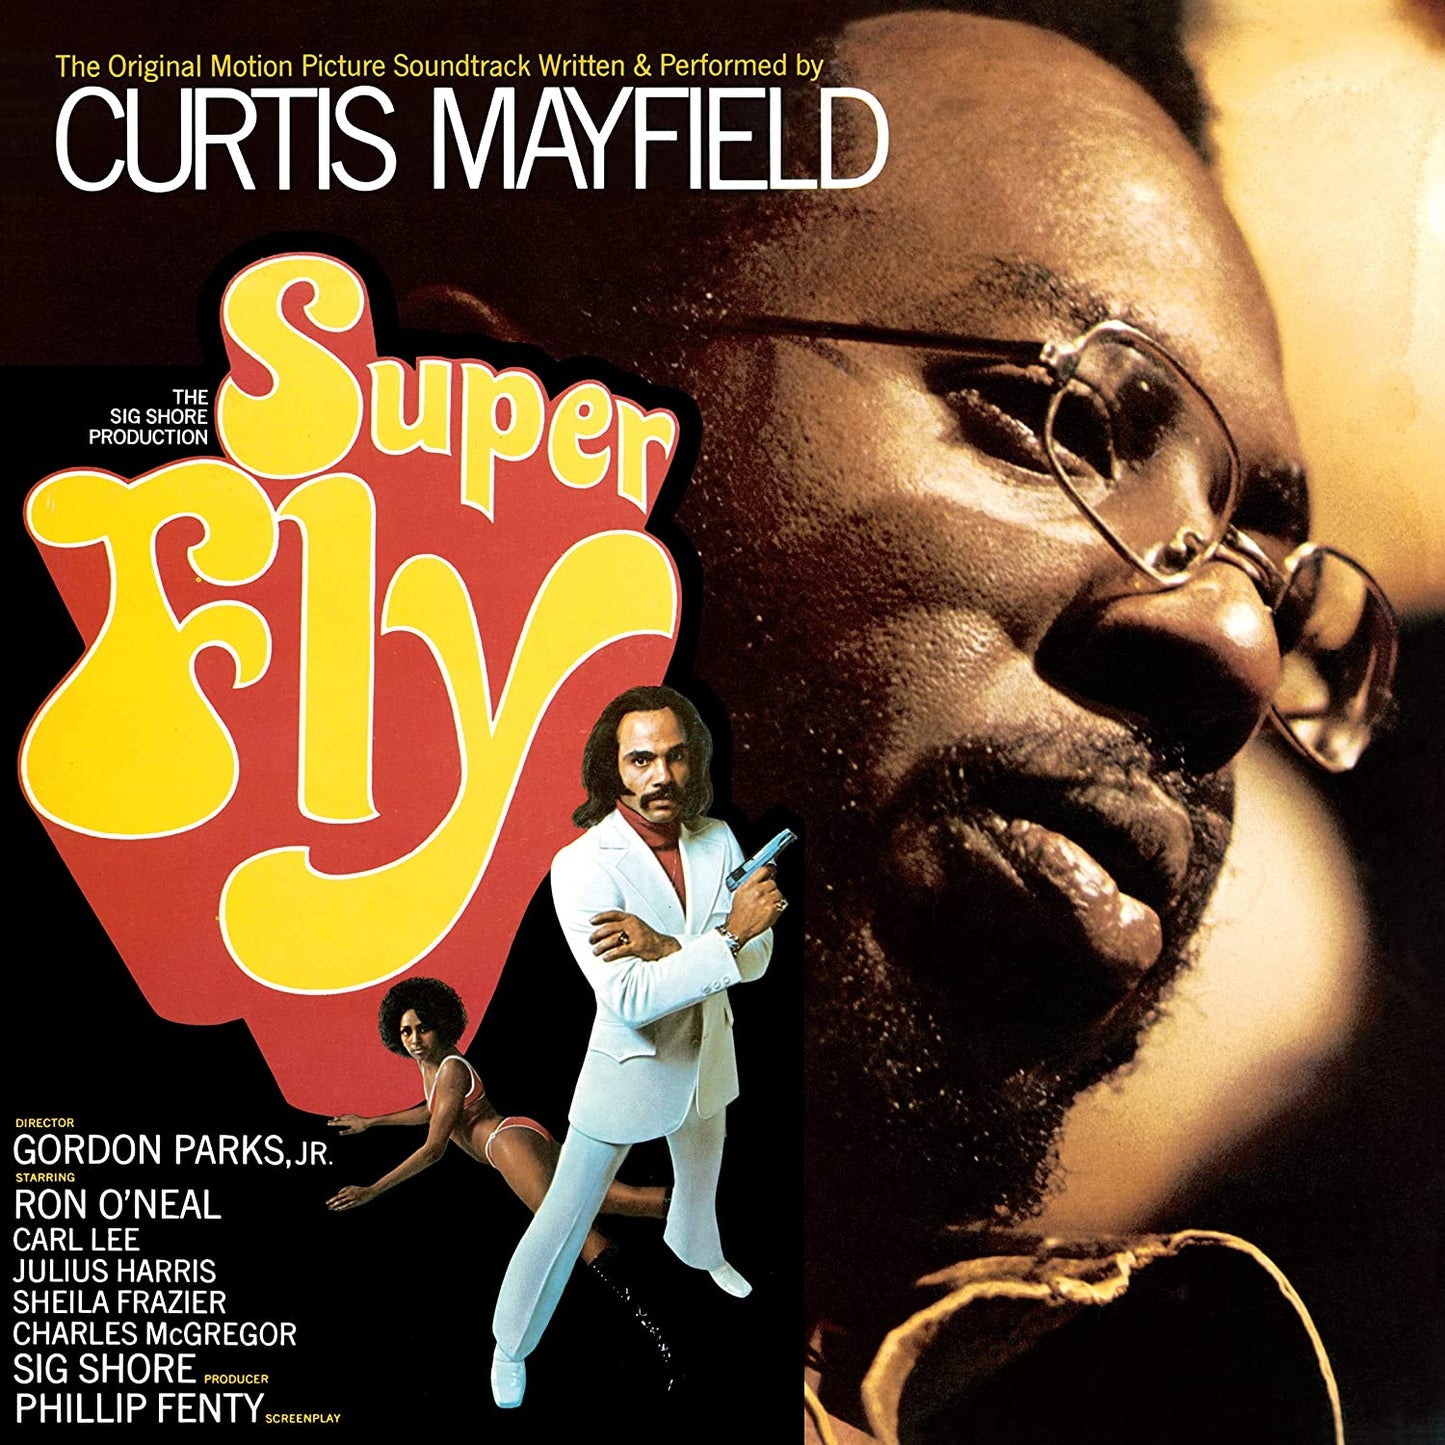 Curtis Mayfield - Superfly (The Original Motion Picture Soundtrack) (50th Anniversary Deluxe Edition) (2 LP) - Joco Records